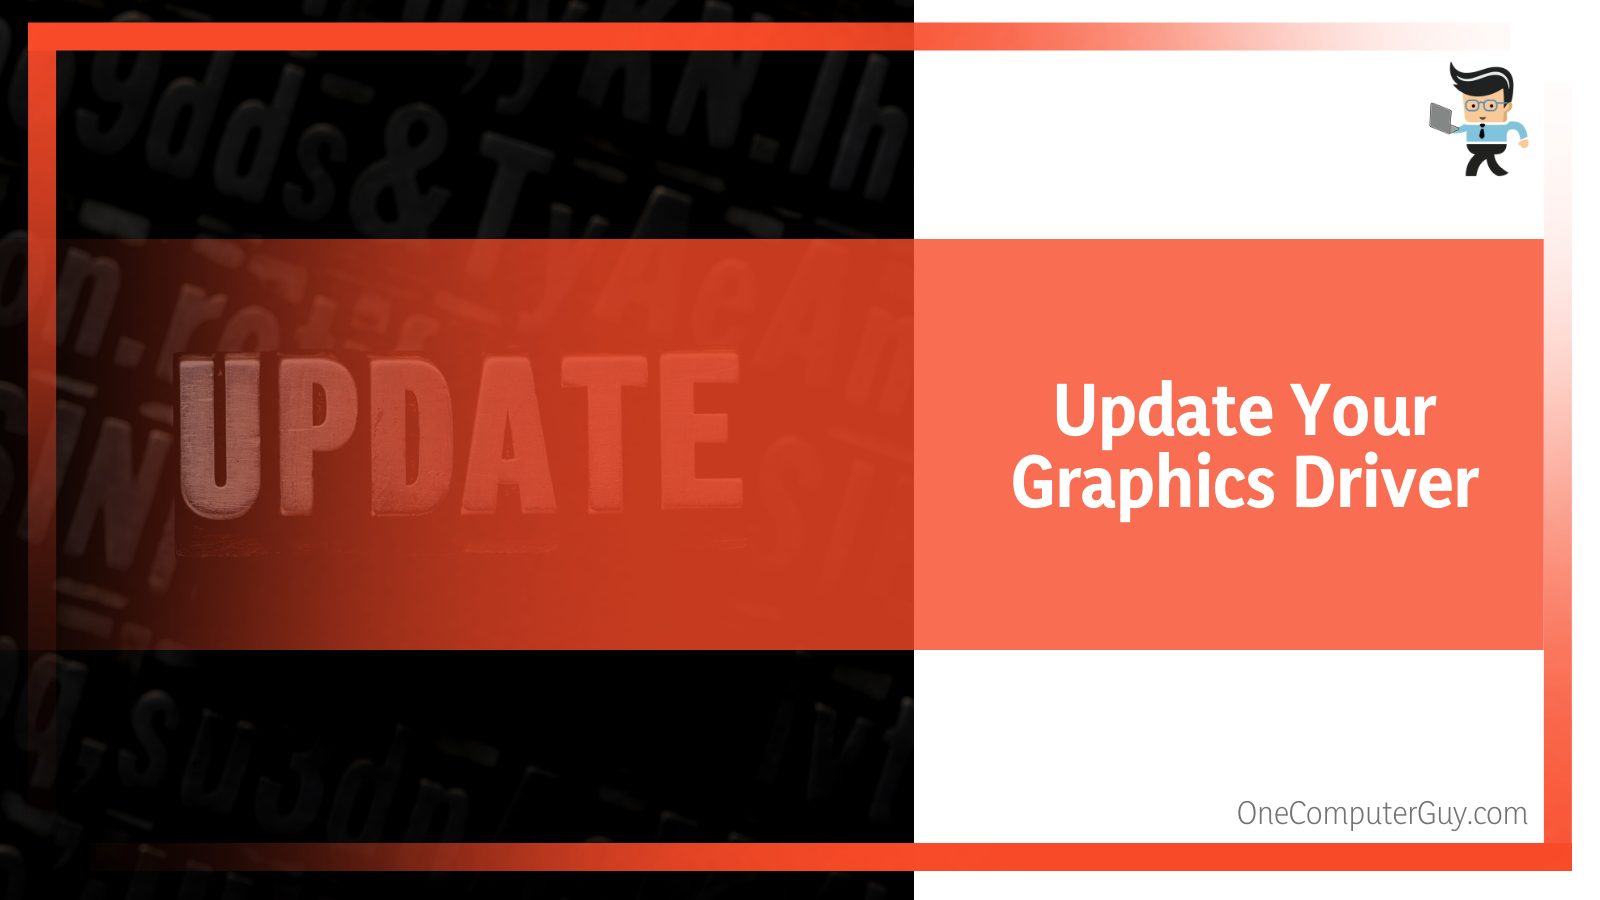 Update Your Graphics Driver